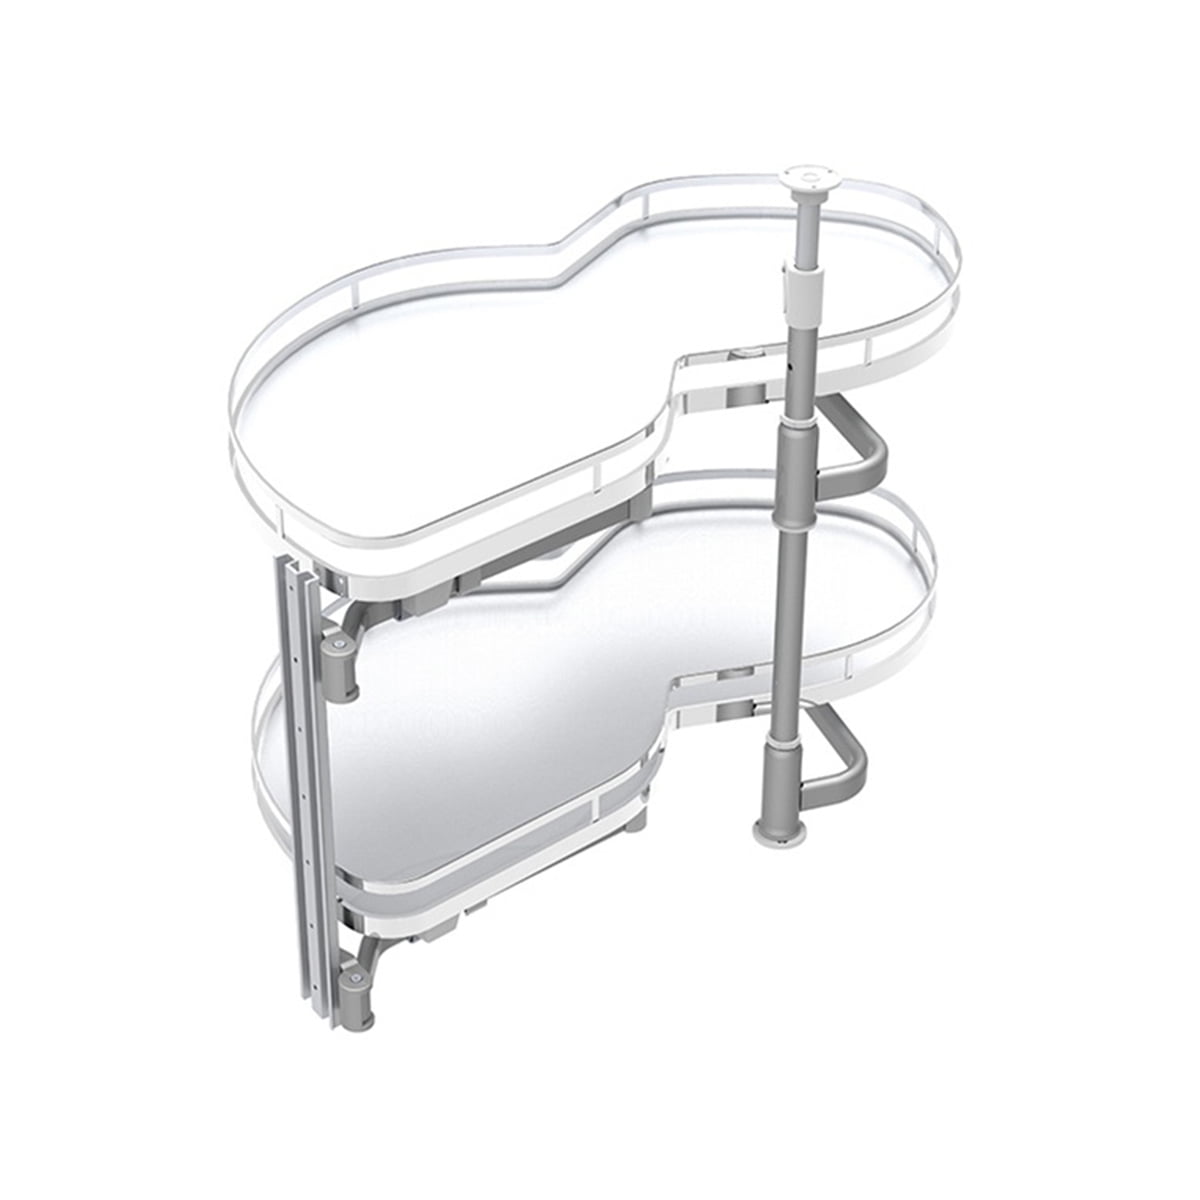 kidney style swing storage unit full softclose 2 trays RIGHT HANDED swing tray 